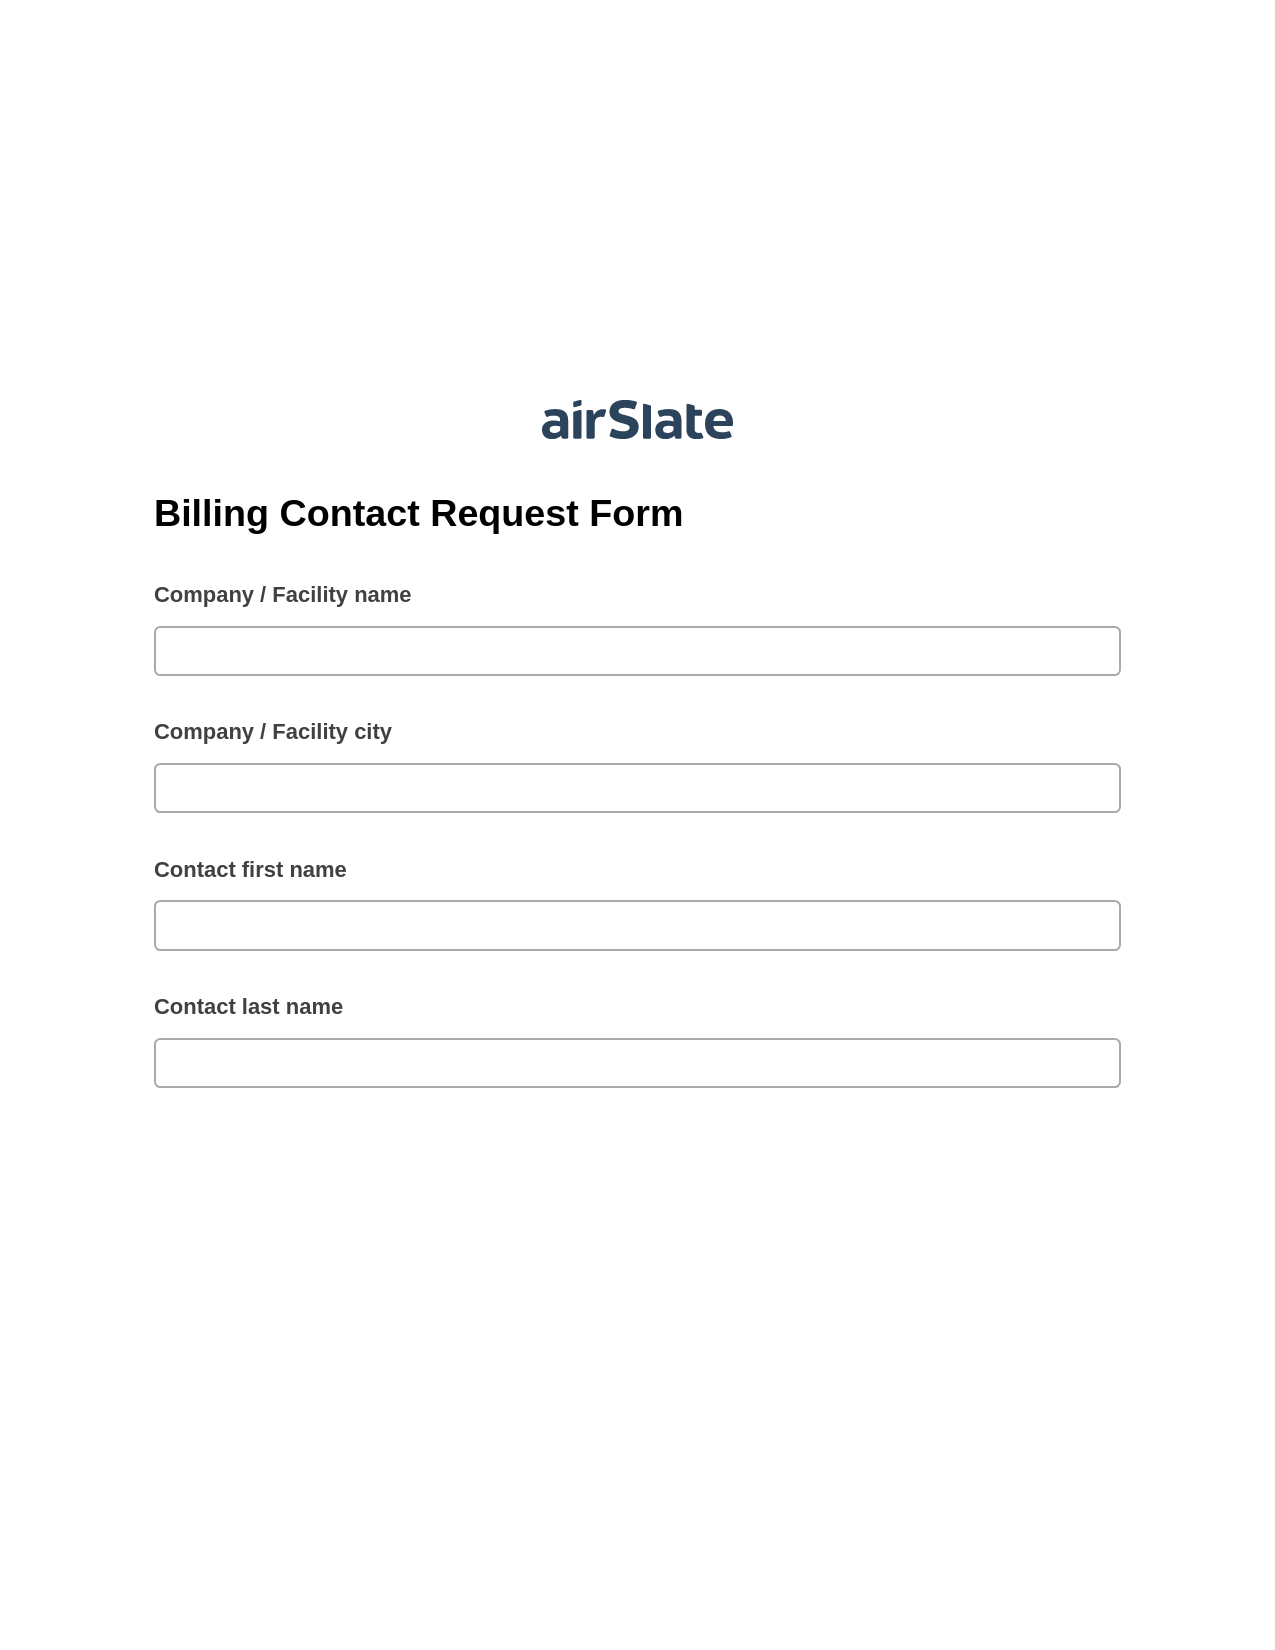 Billing Contact Request Form Pre-fill from Salesforce Record Bot, Document Hide Bot, Export to Smartsheet